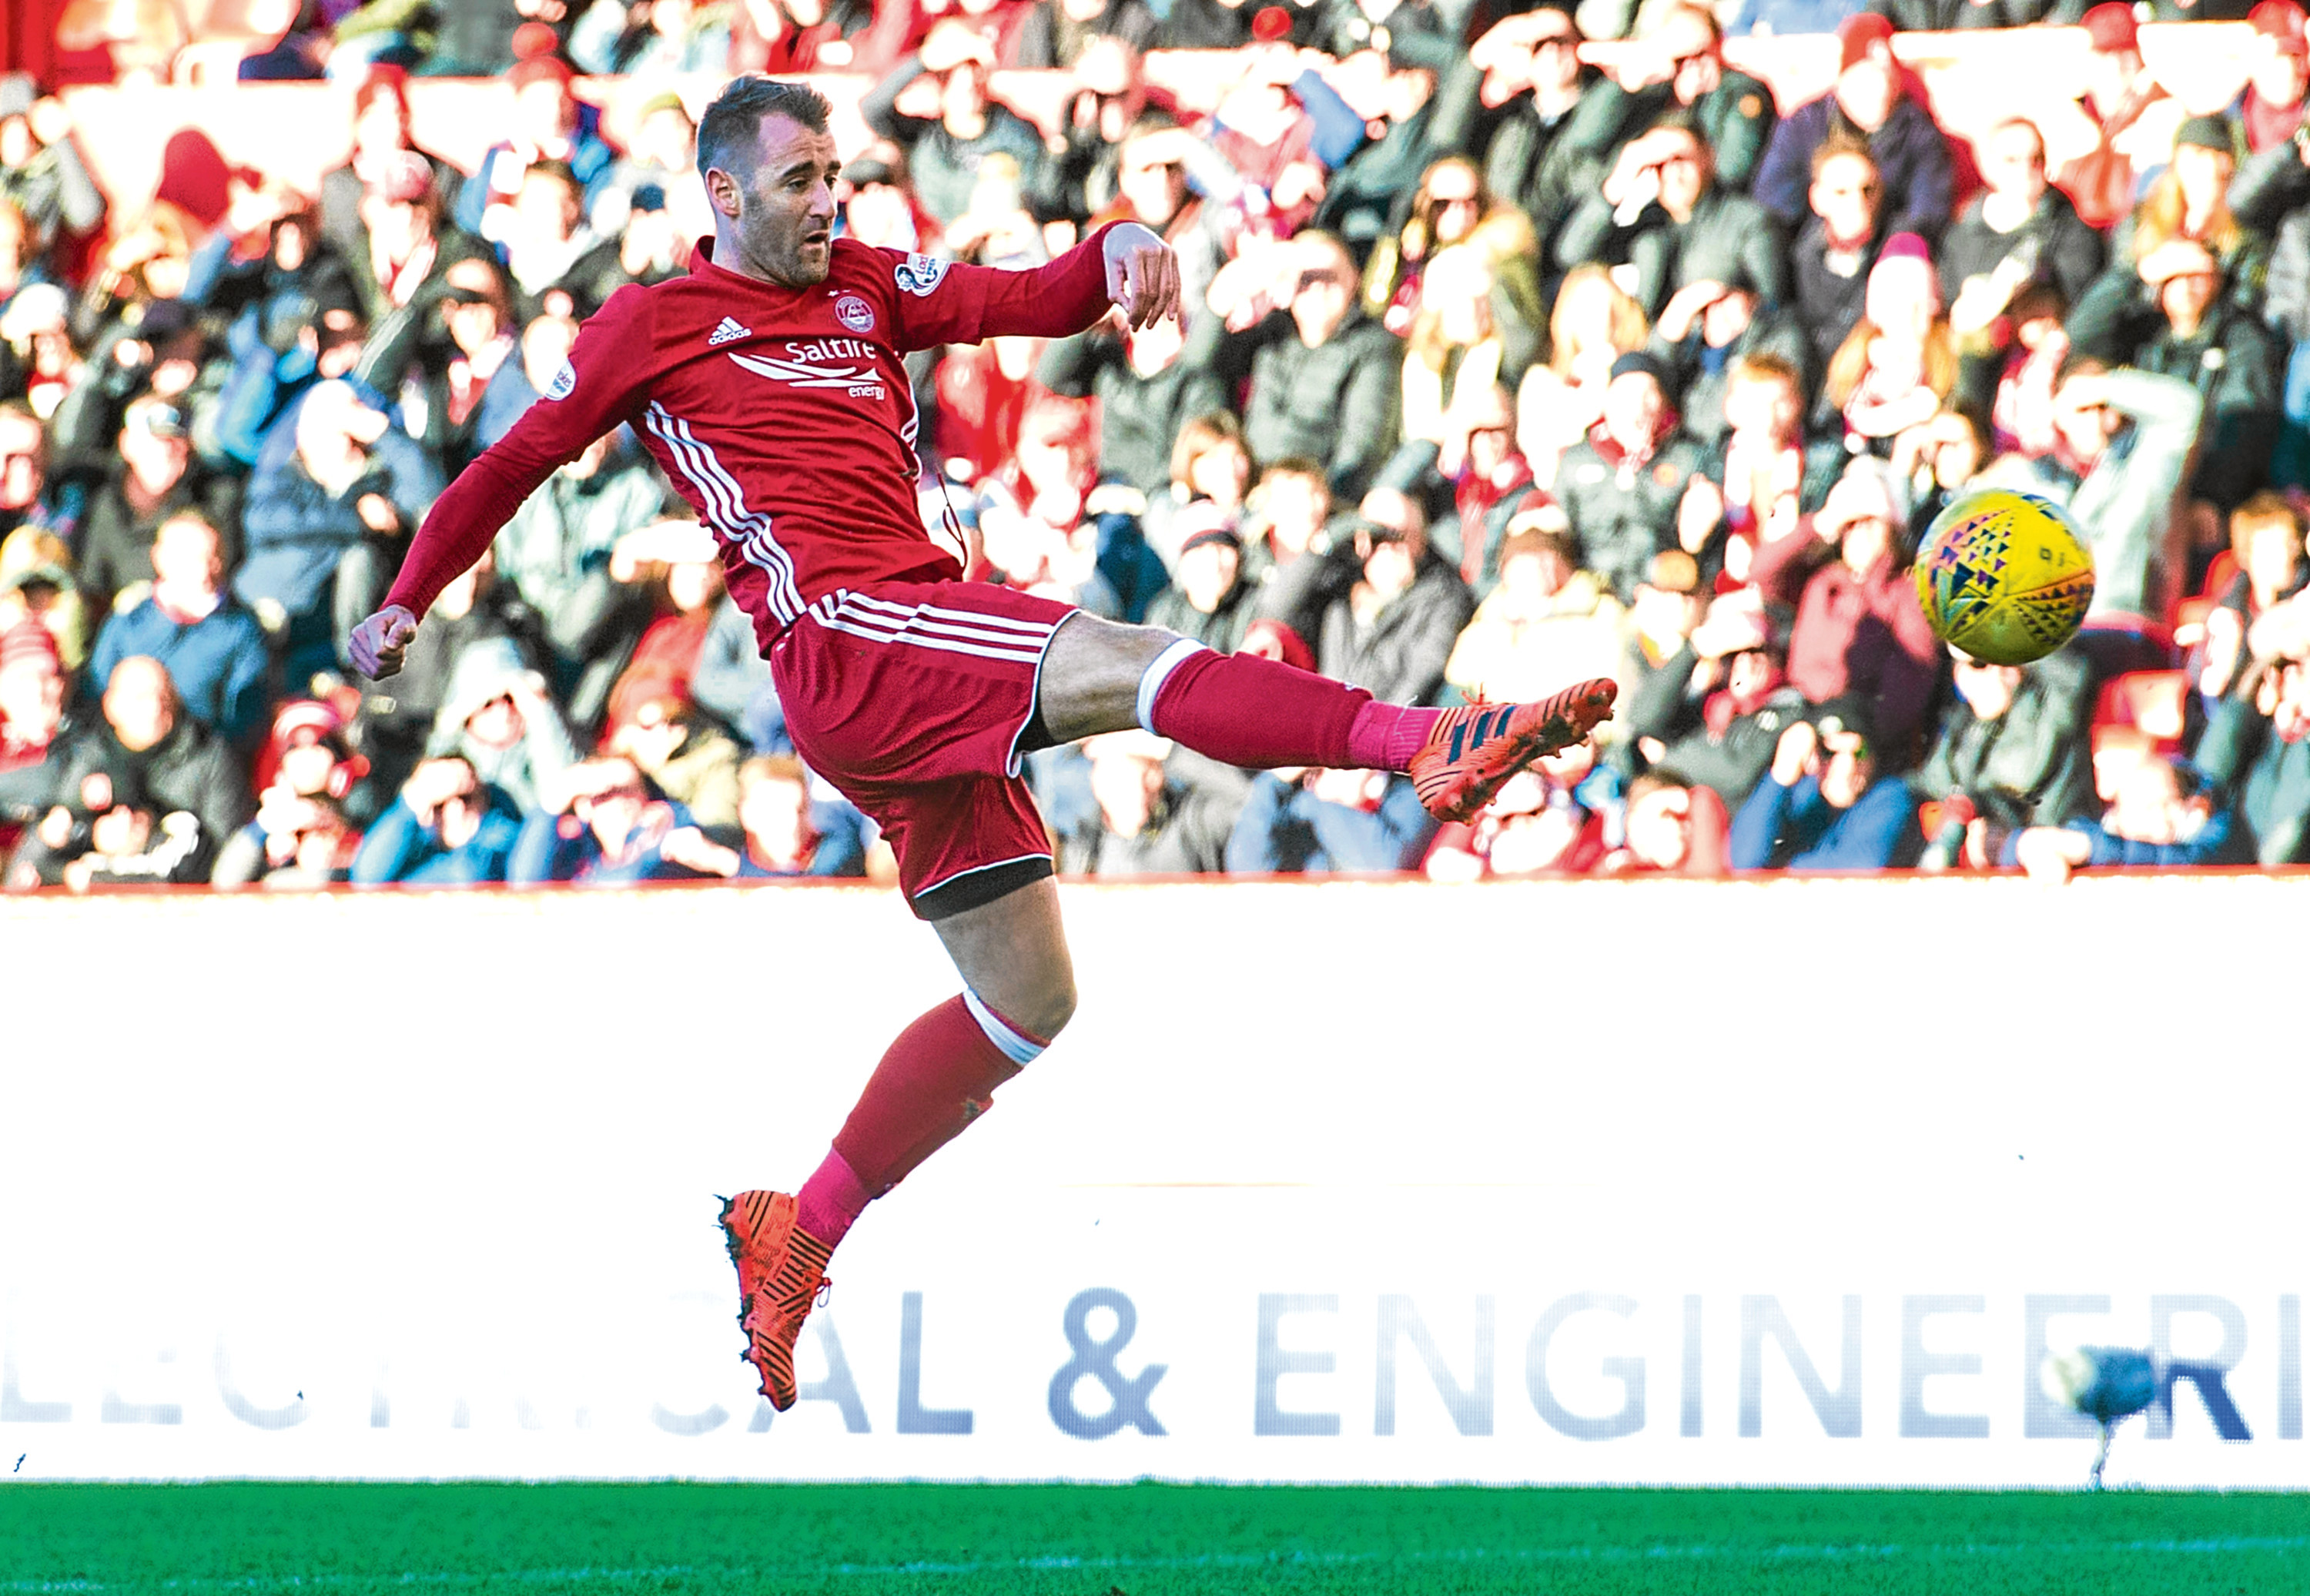 Niall McGinn hit the woodwork at the end of the first half for Aberdeen.